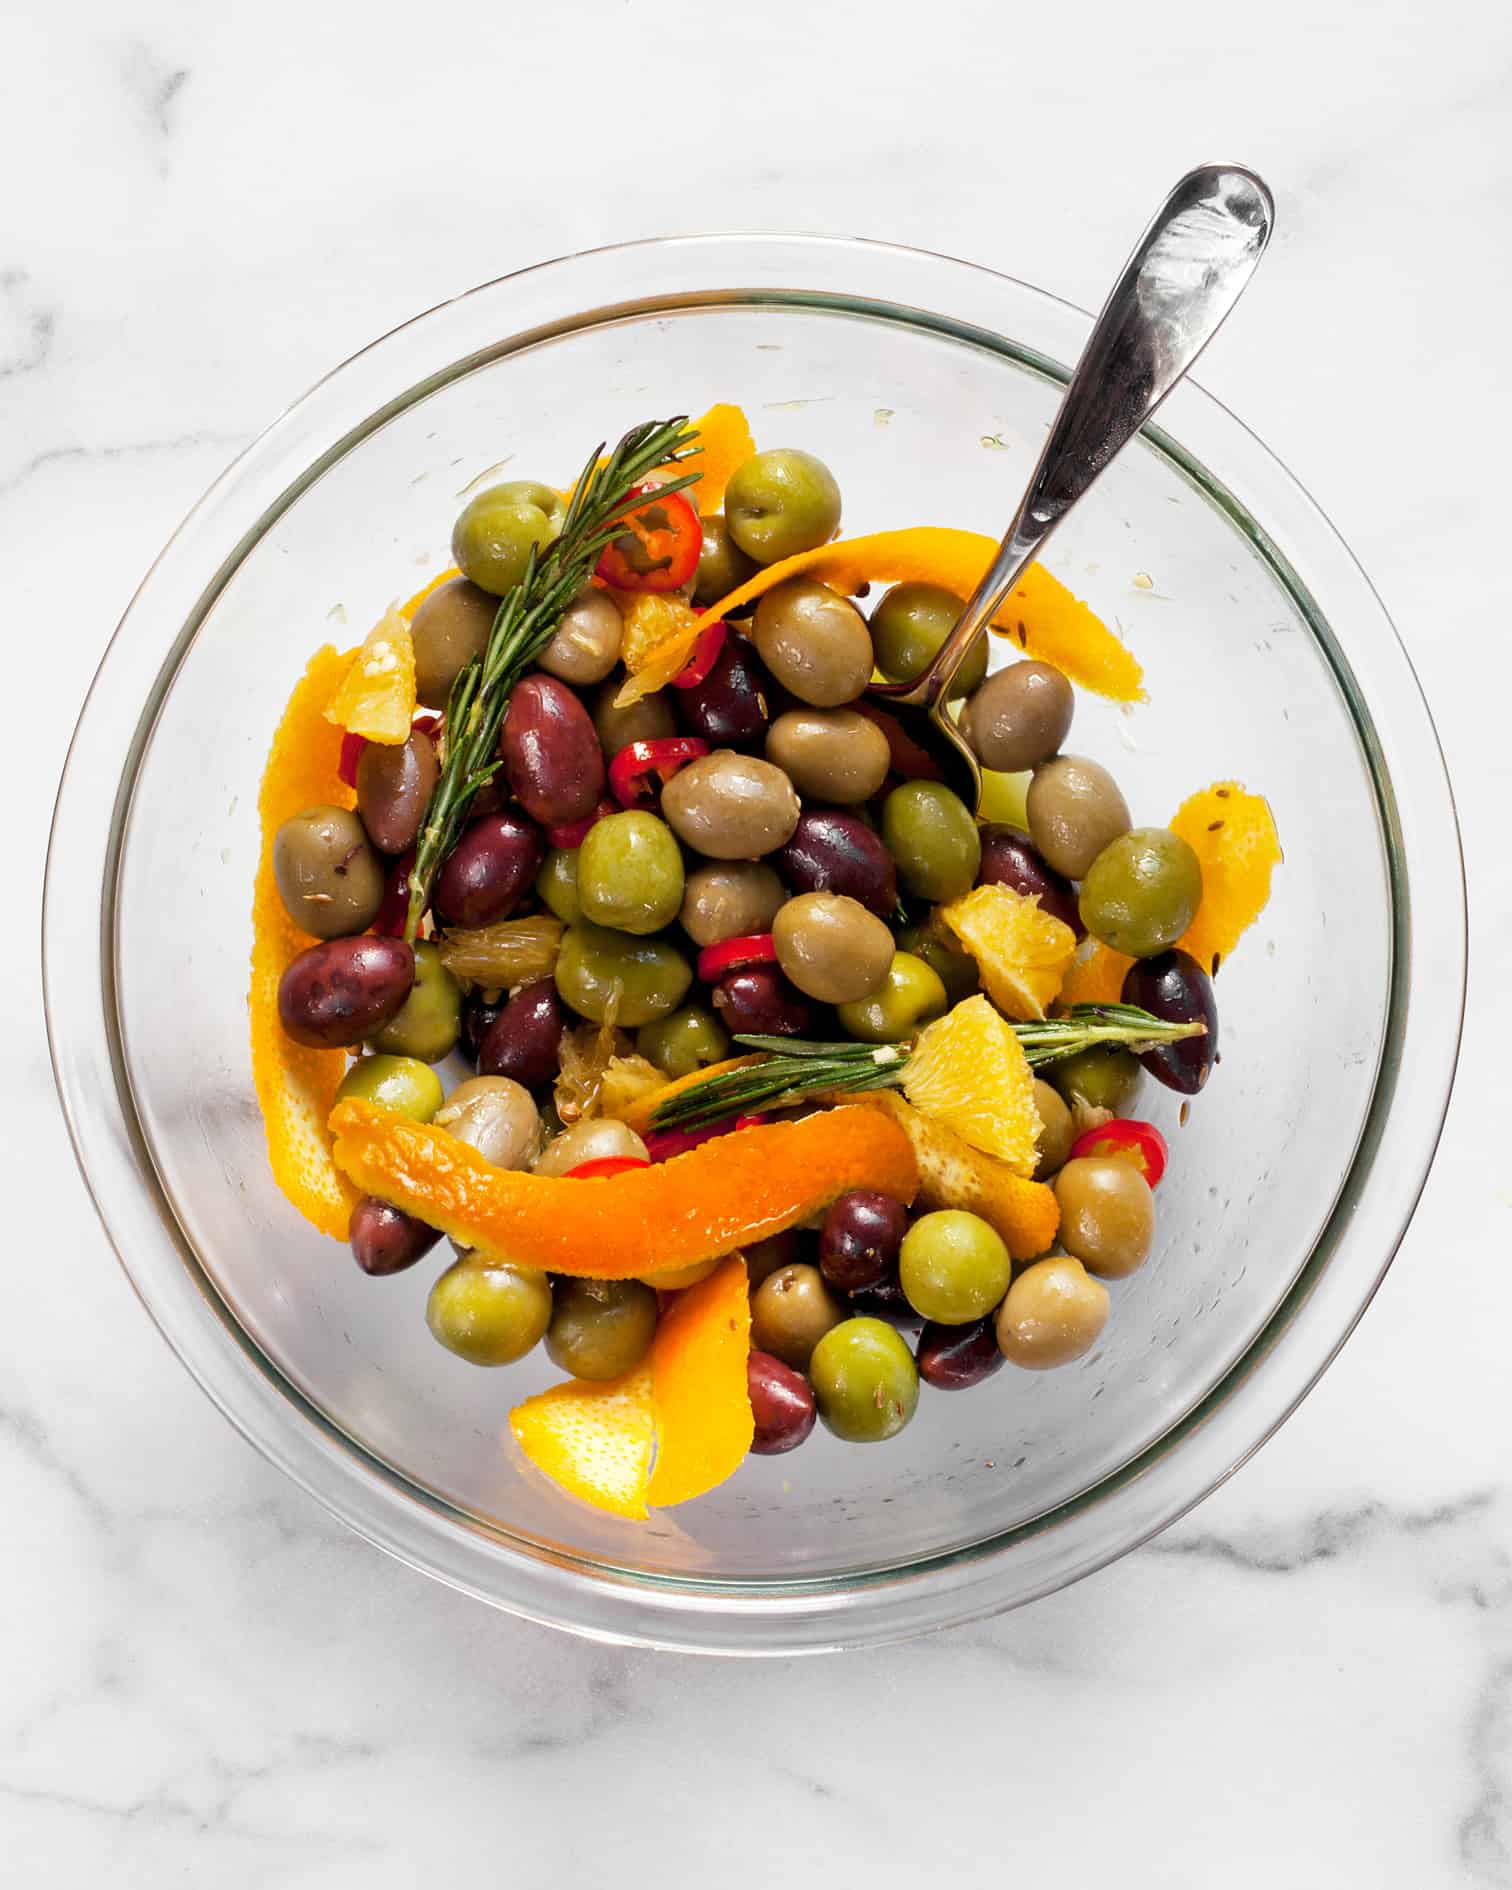 Combine teh olives, oranges, olive oil, chilies and spices in a bowl